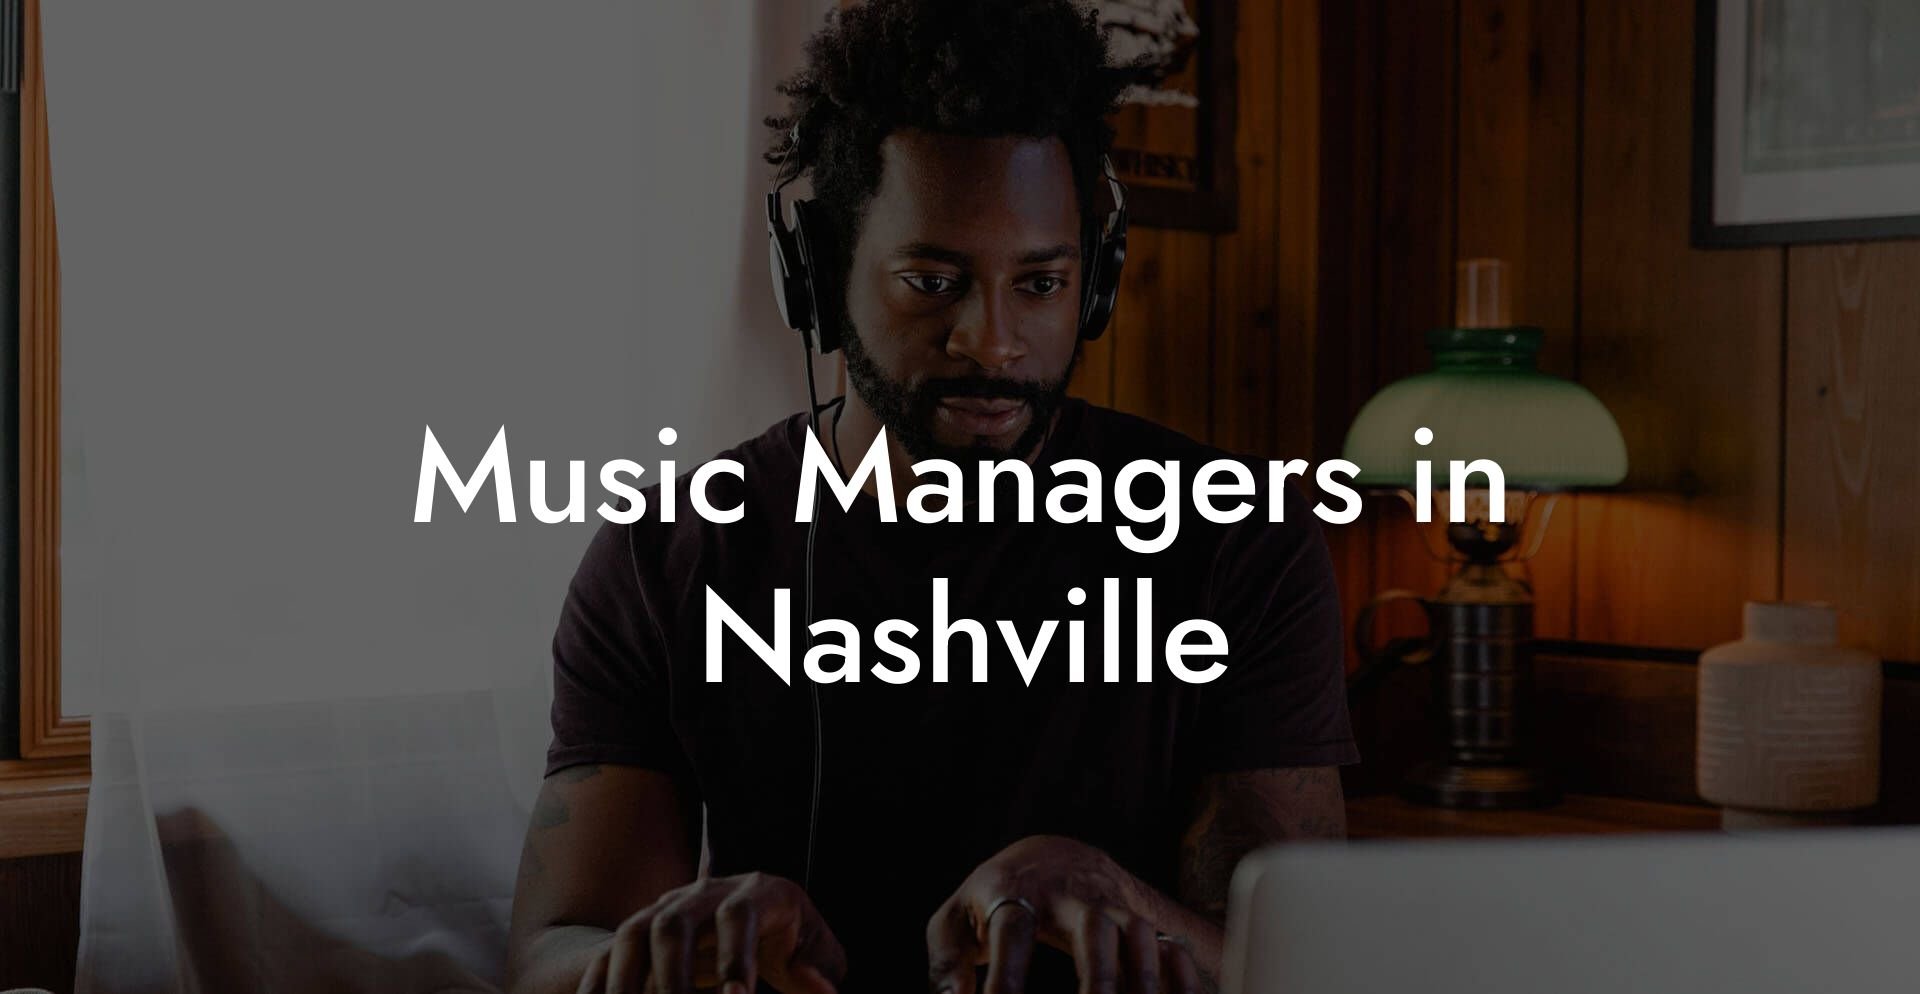 Music Managers in Nashville